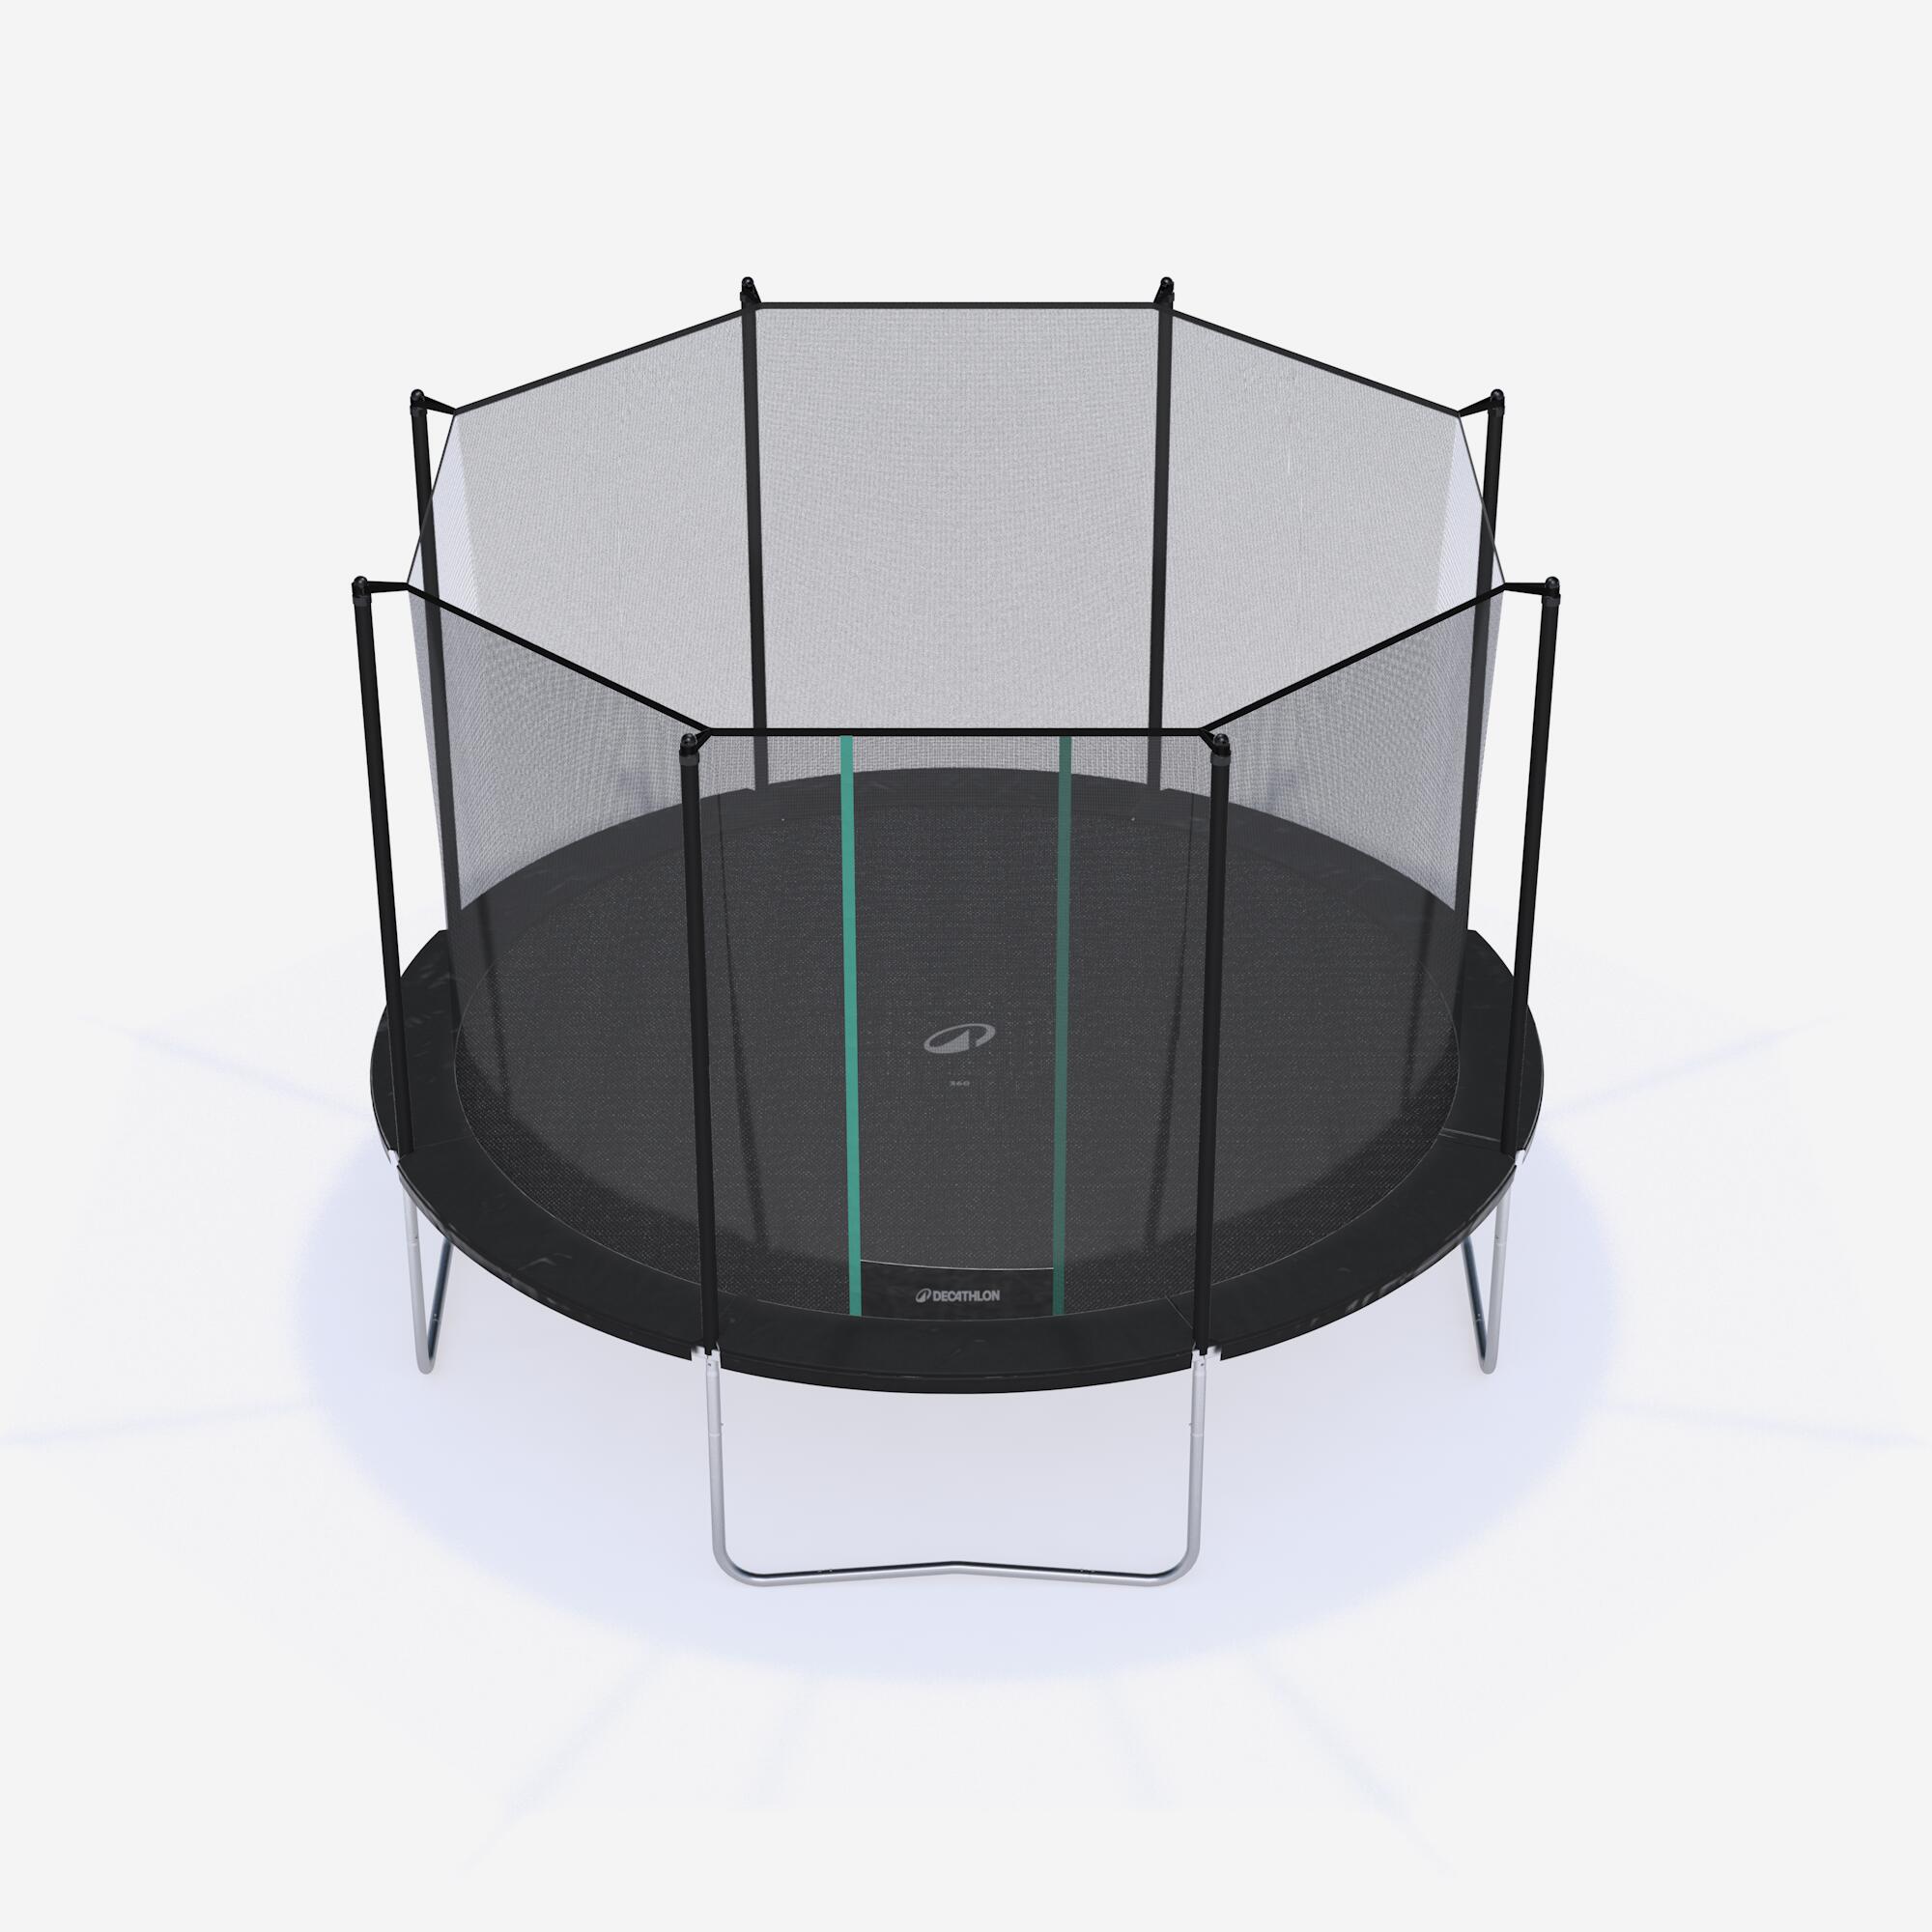 DOMYOS Trampoline 360 with Netting - Tool-Free Design